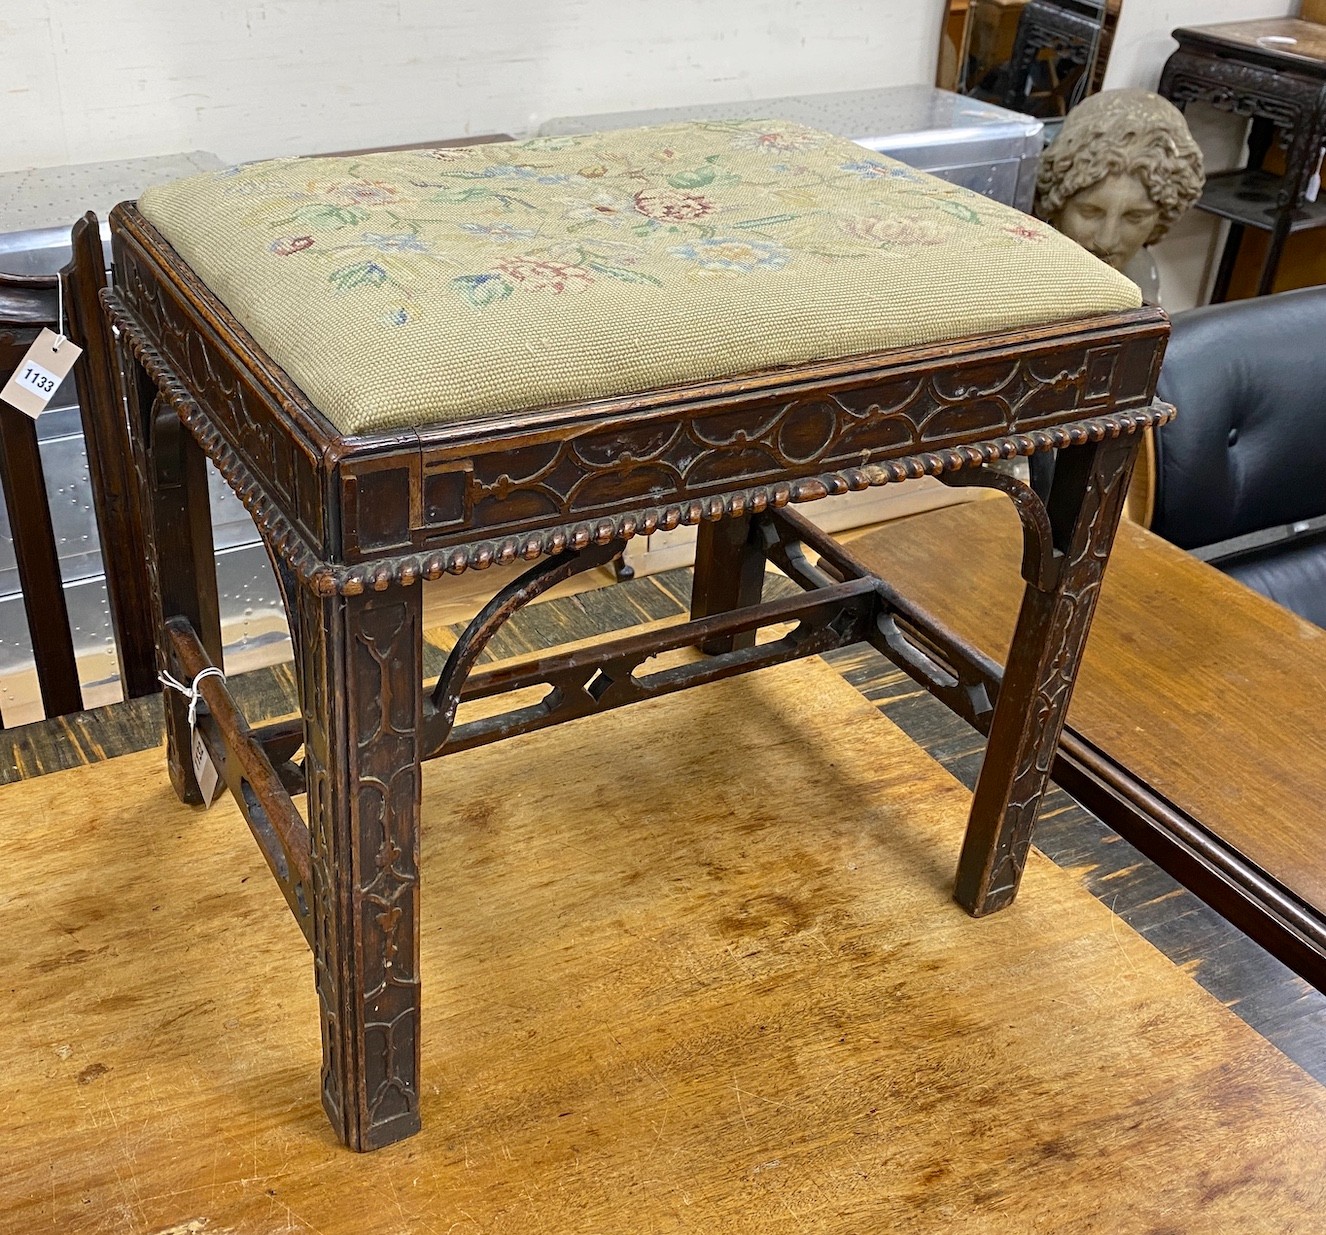 A Chippendale revival mahogany dressing stool with needlework drop in seat and blind fret carving, width 53cm, height 47cm